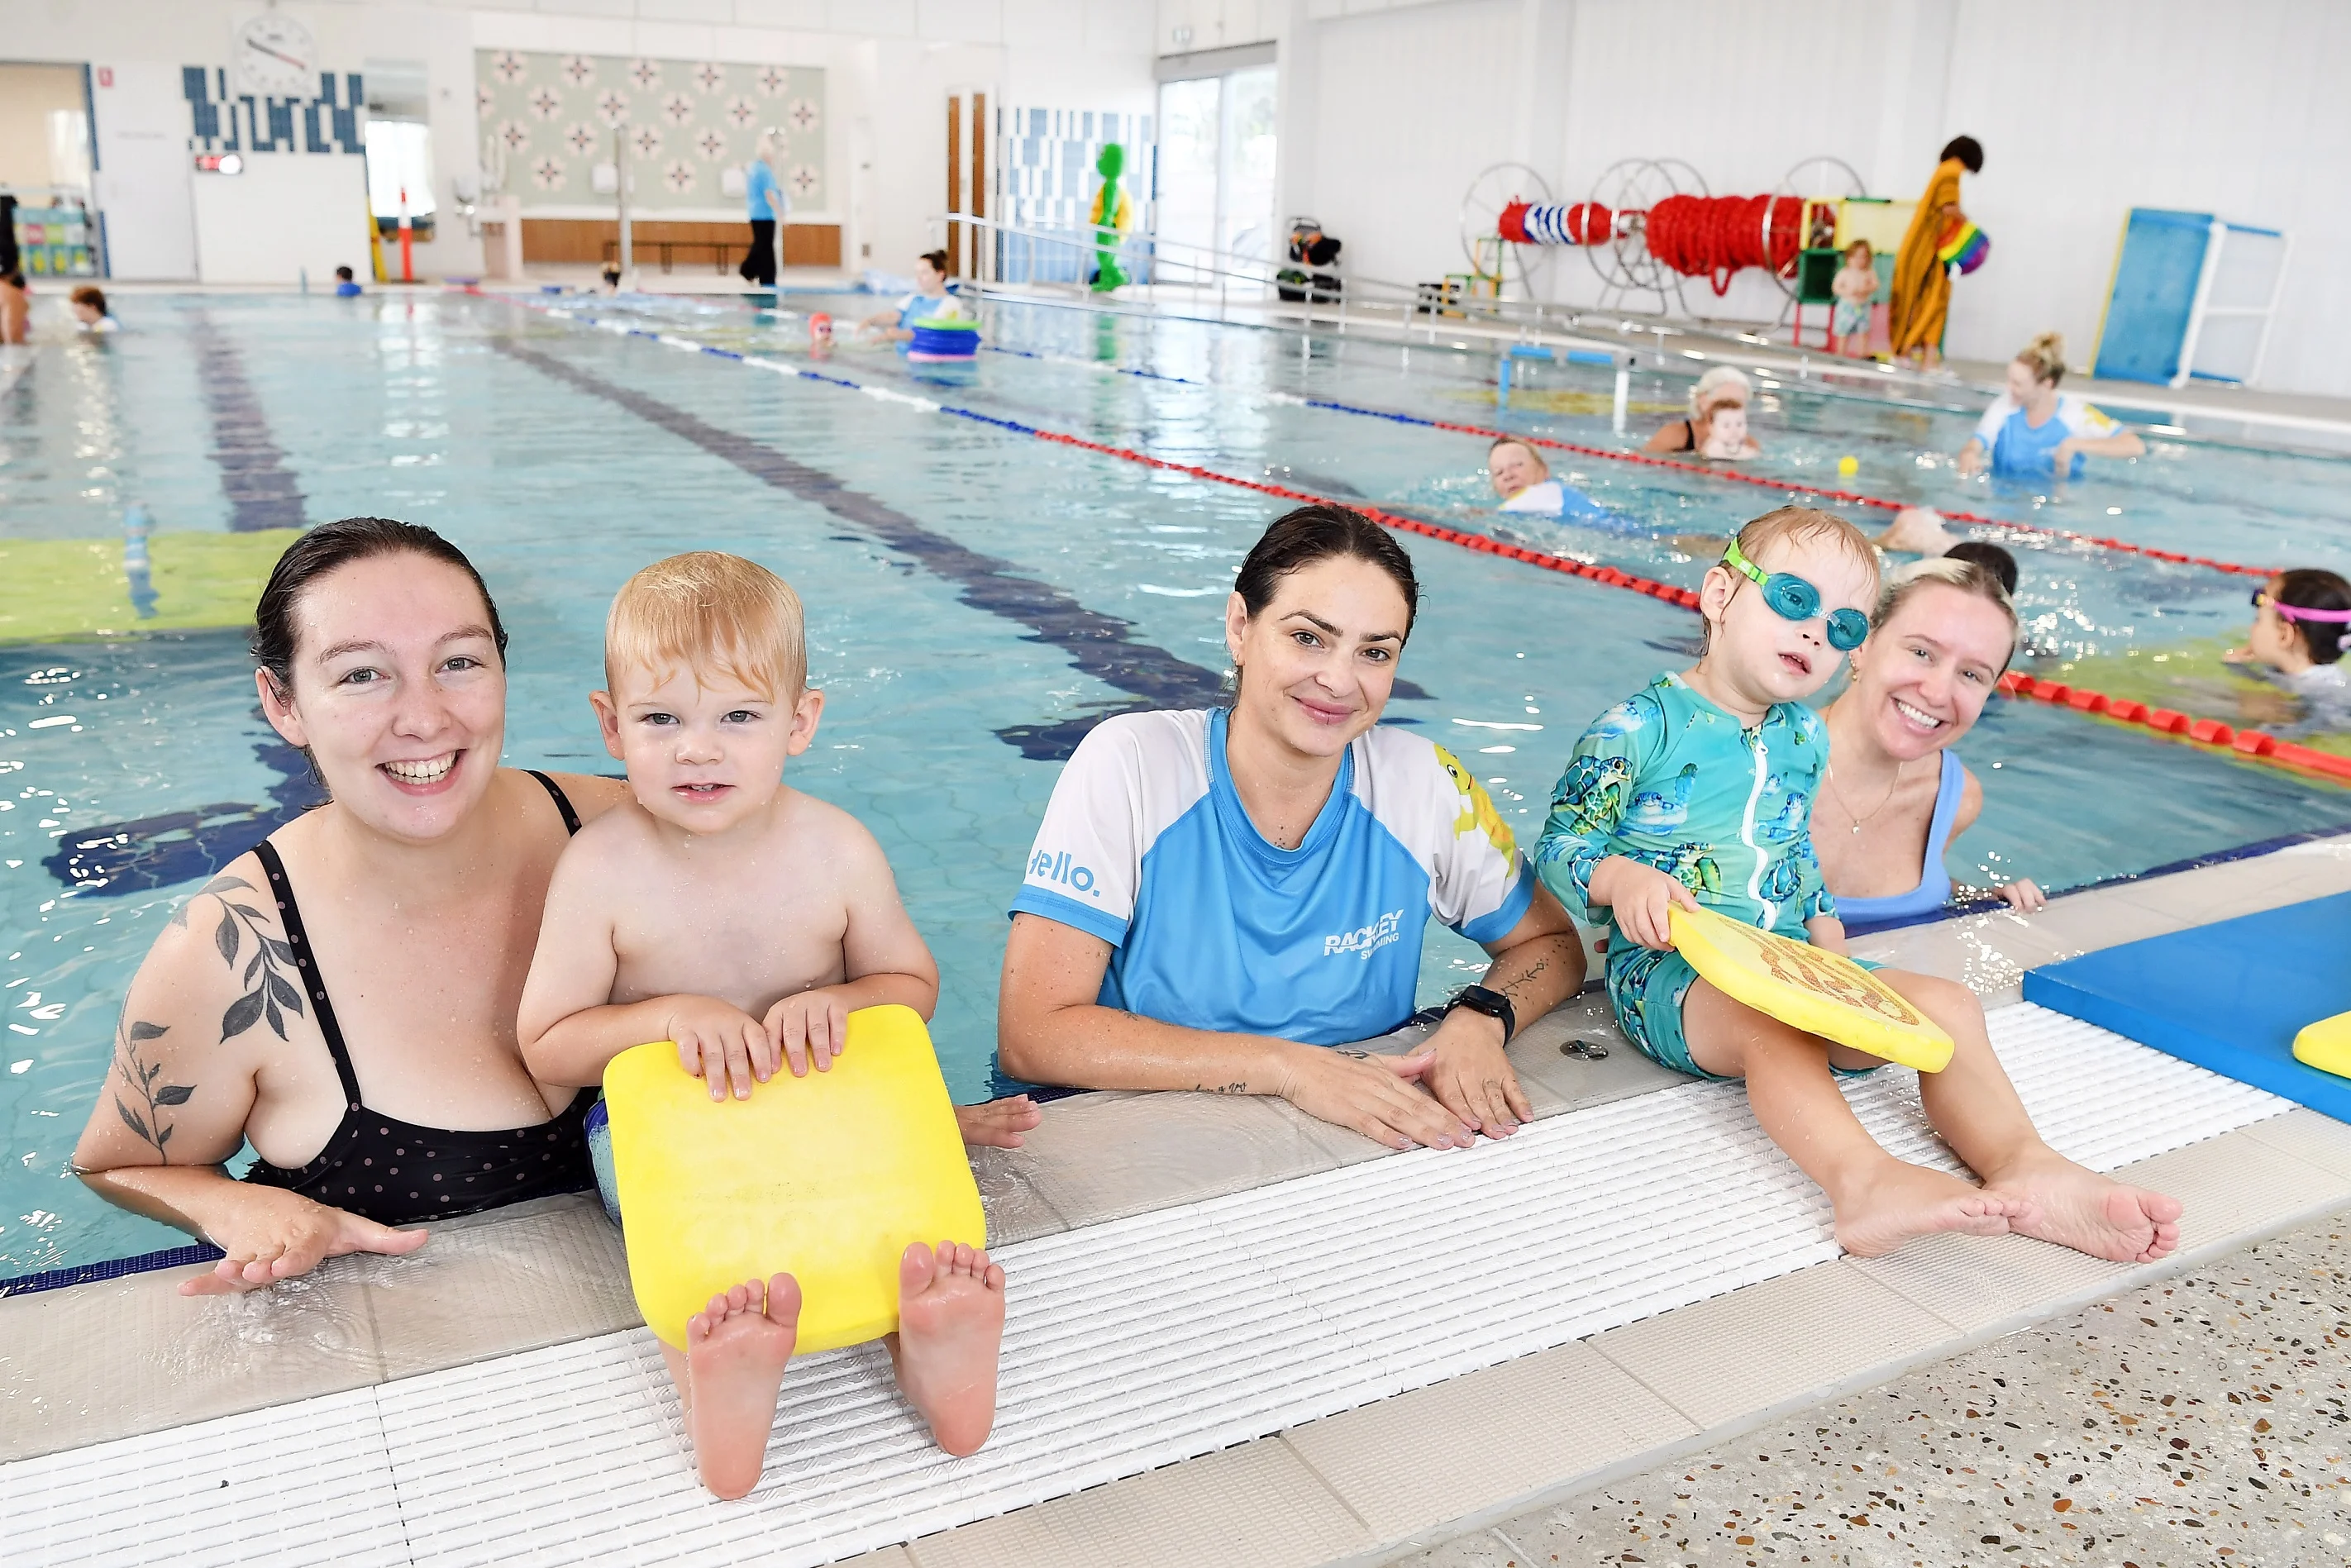 (Left to right) Rachel Turnbull with her son Jacob, Rackley Swimming Instructor Latoya Rodriguez, and Paxton Ciseau with mum Melissa